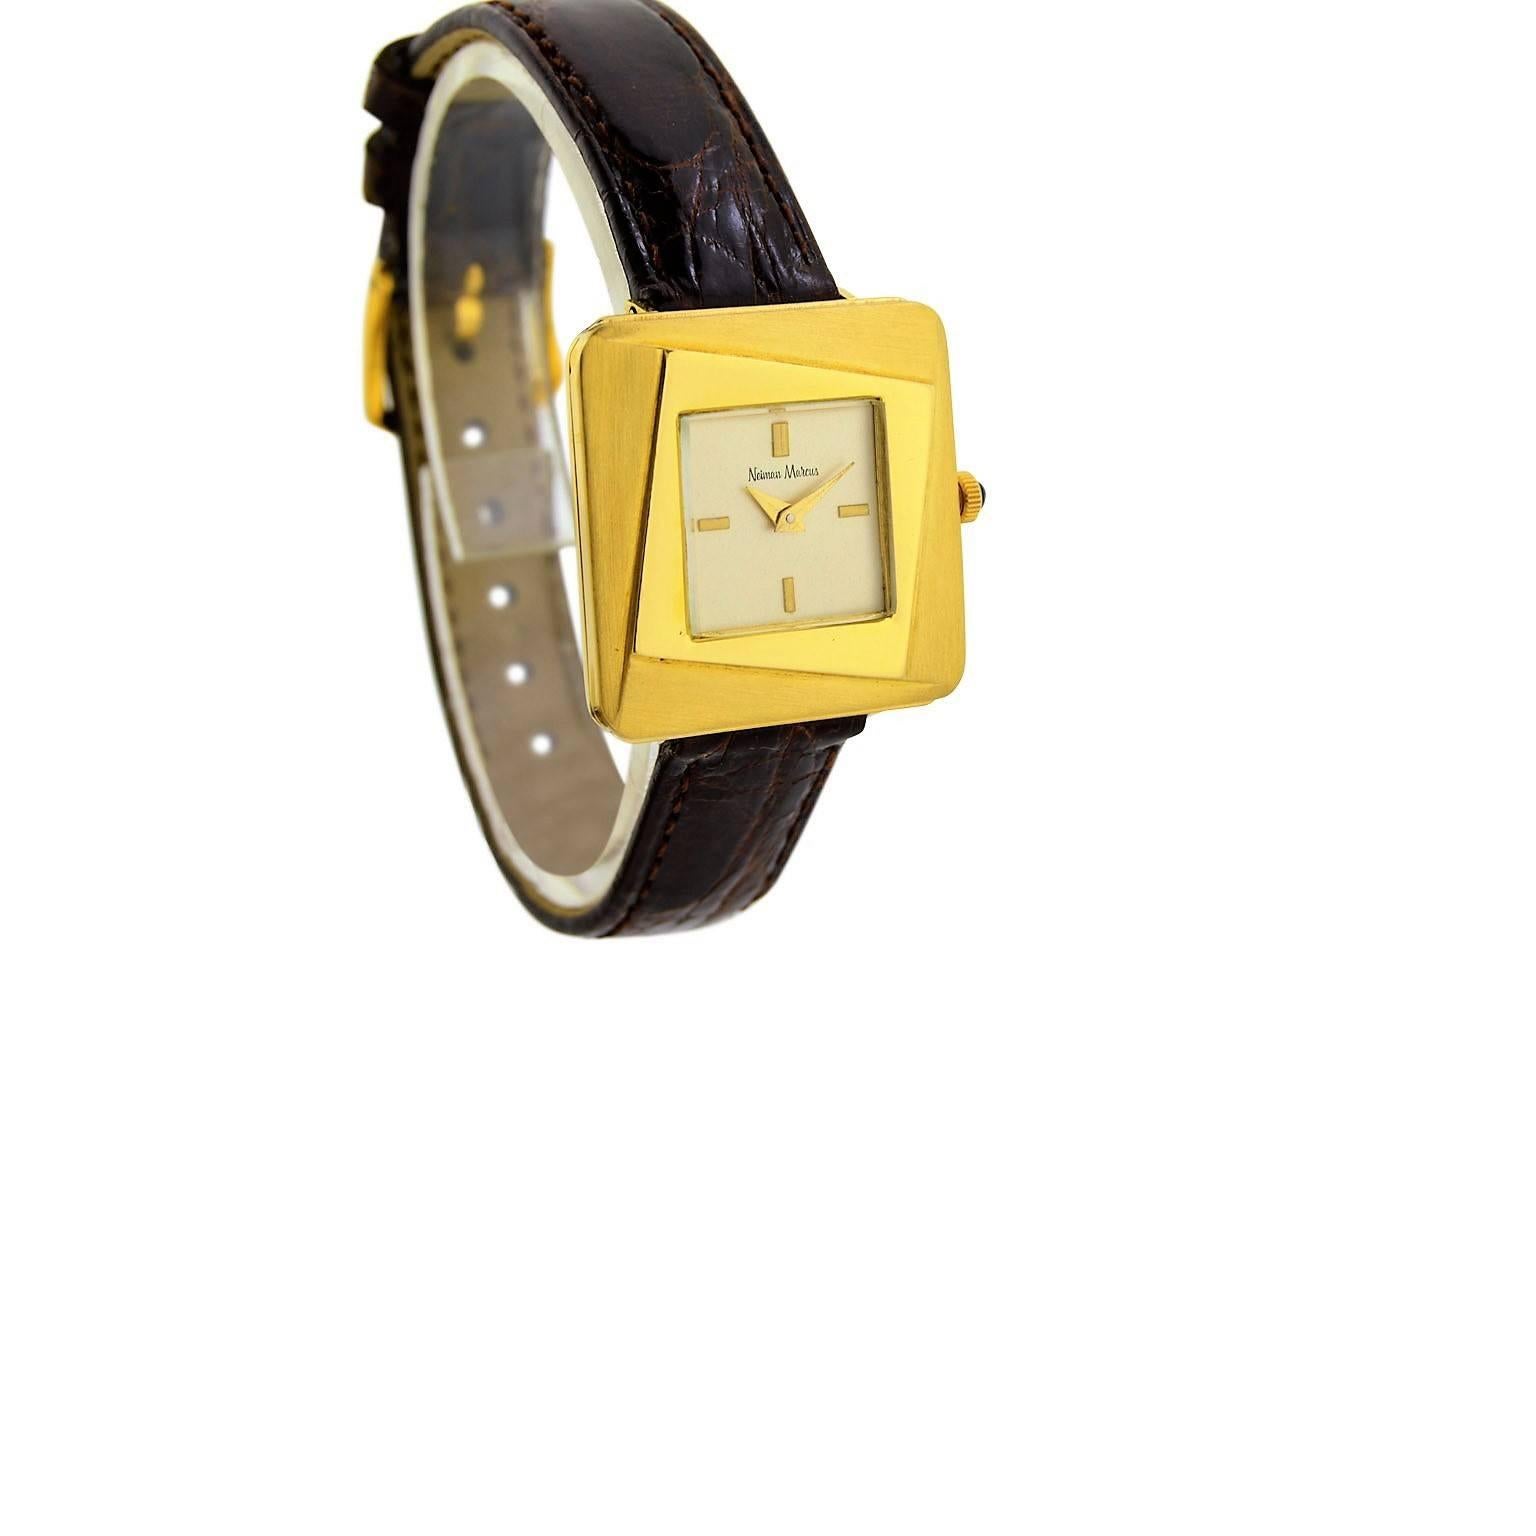 FACTORY / HOUSE: Neiman Marcus
STYLE / REFERENCE: Square / Moderne Mid Century
METAL / MATERIAL: 18Kt. Yellow Gold
DIMENSIONS:  28mm X 26mm
CIRCA: 1960's
MOVEMENT / CALIBER: Manual Winding /  17 Jewels 
DIAL / HANDS: Silver w/ Batons / Dauphine